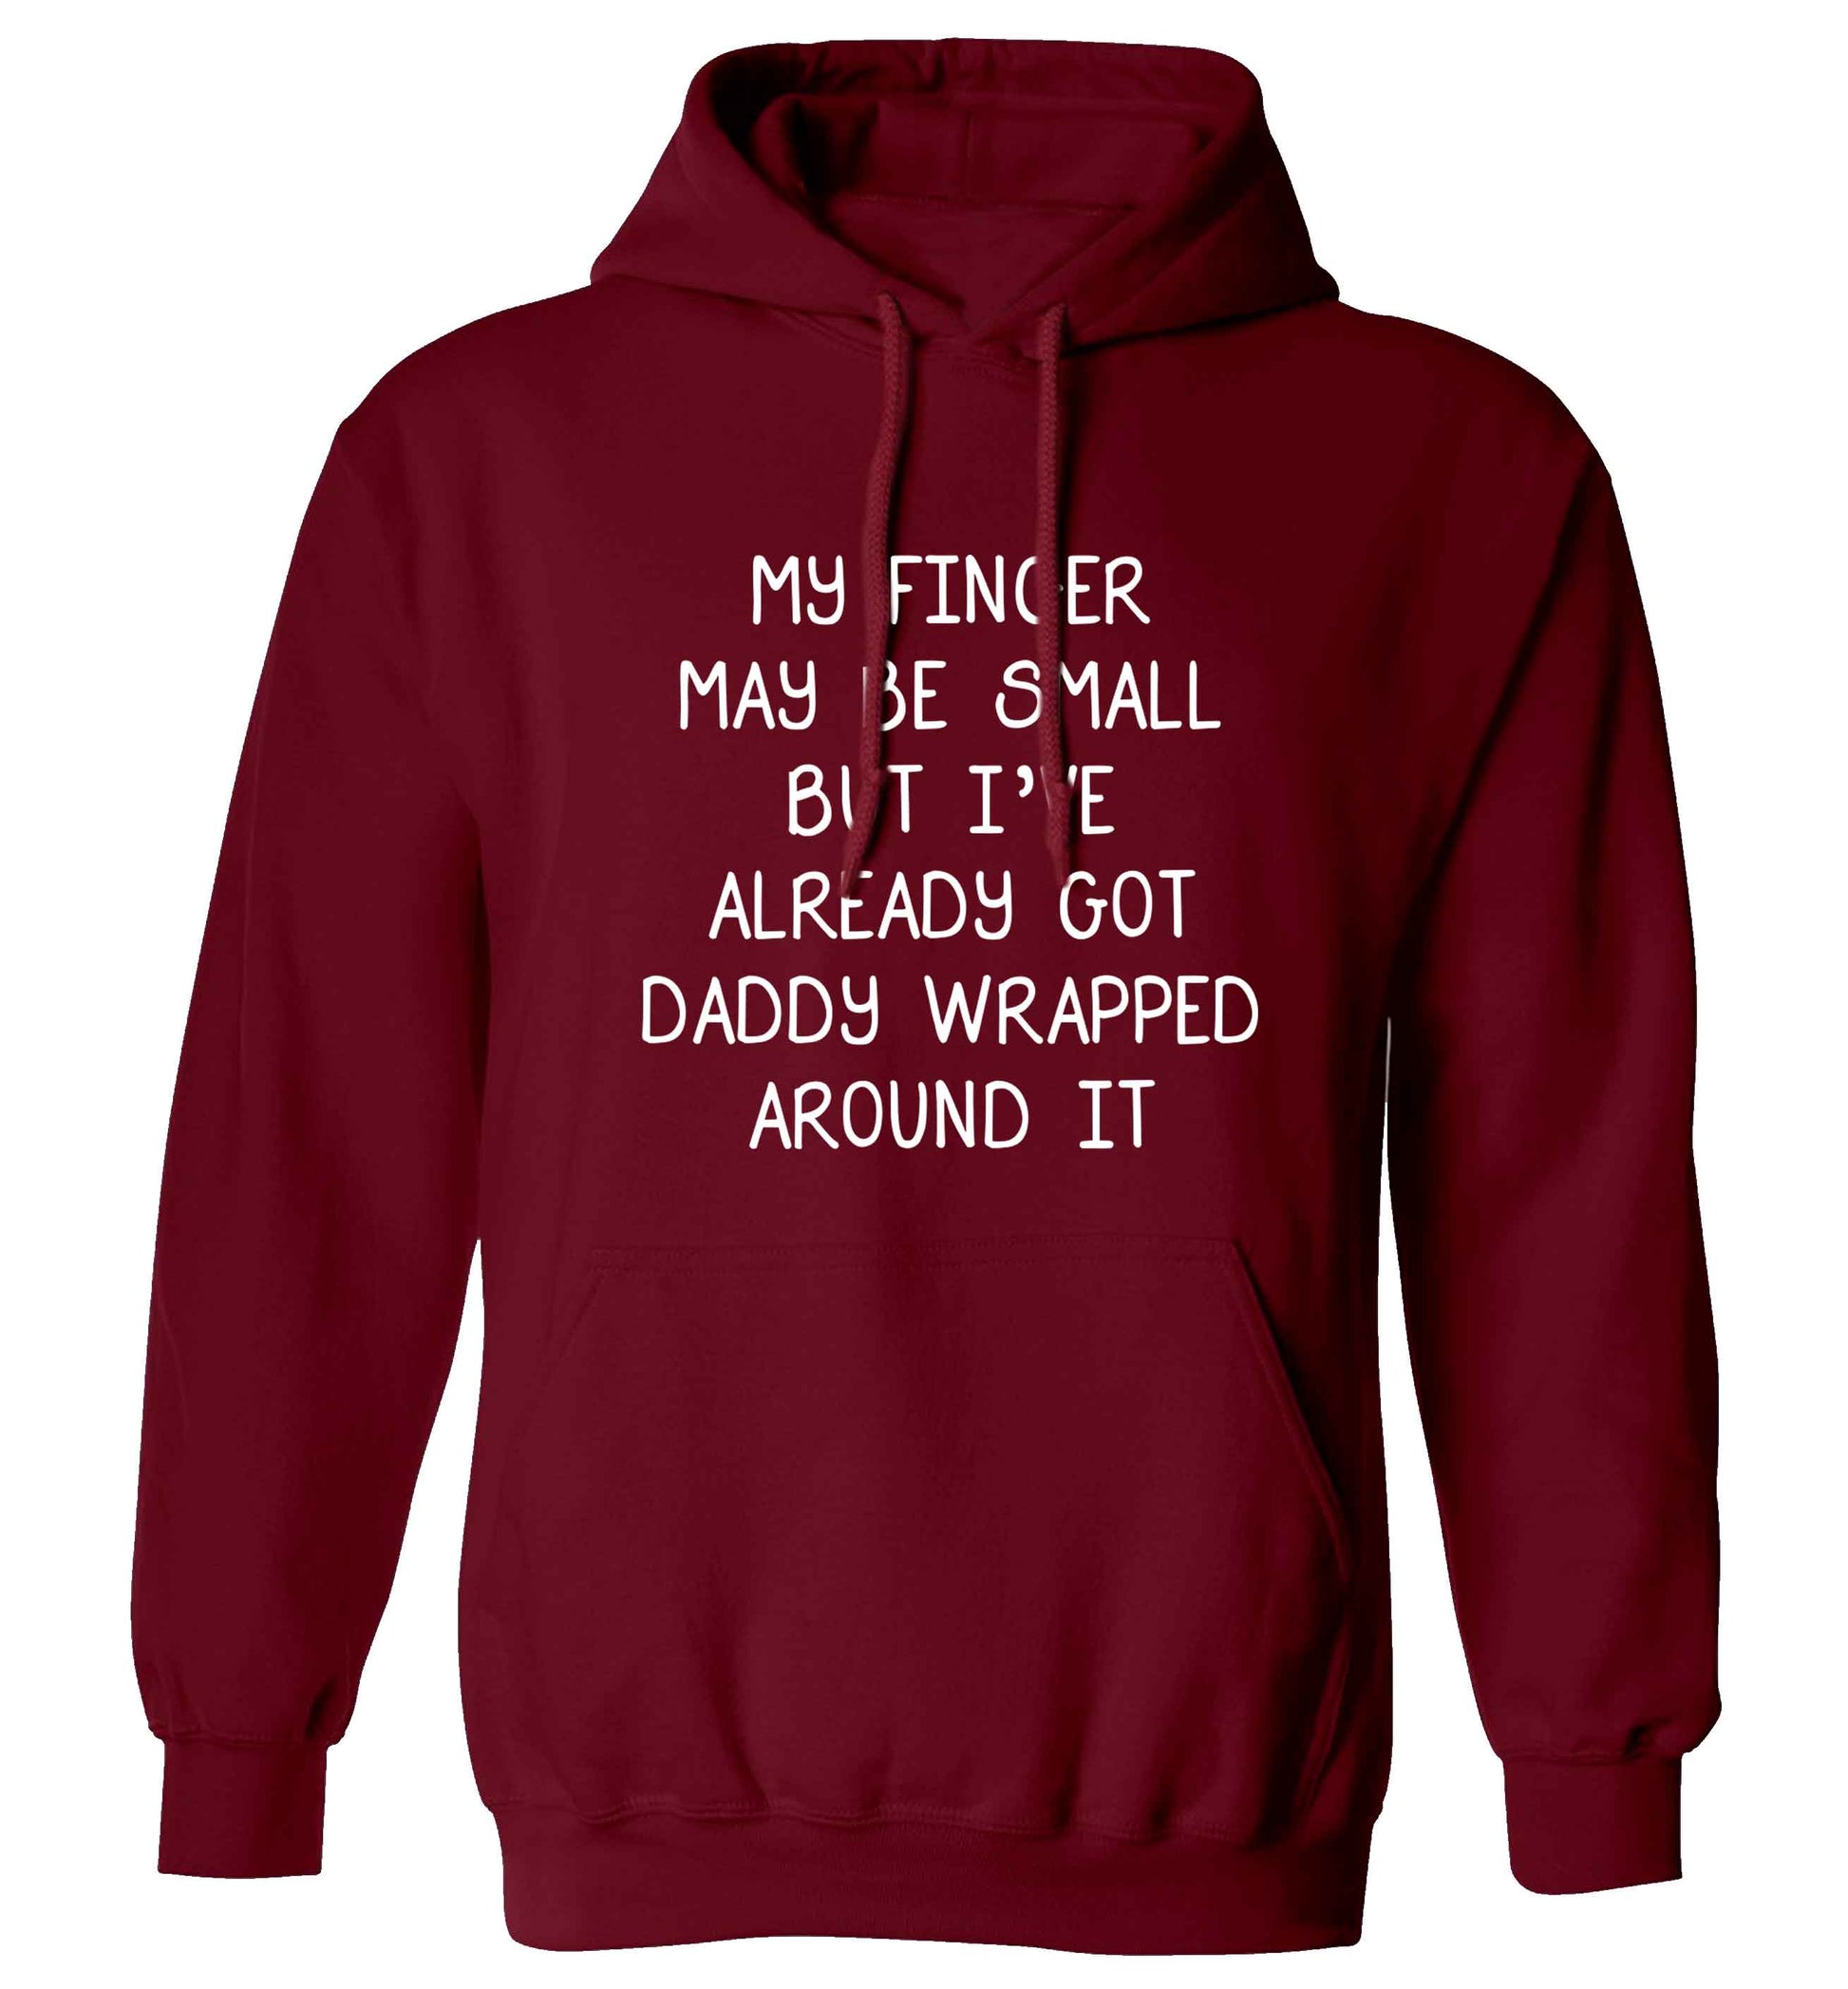 My finger may be small but I've already got daddy wrapped around it adults unisex maroon hoodie 2XL